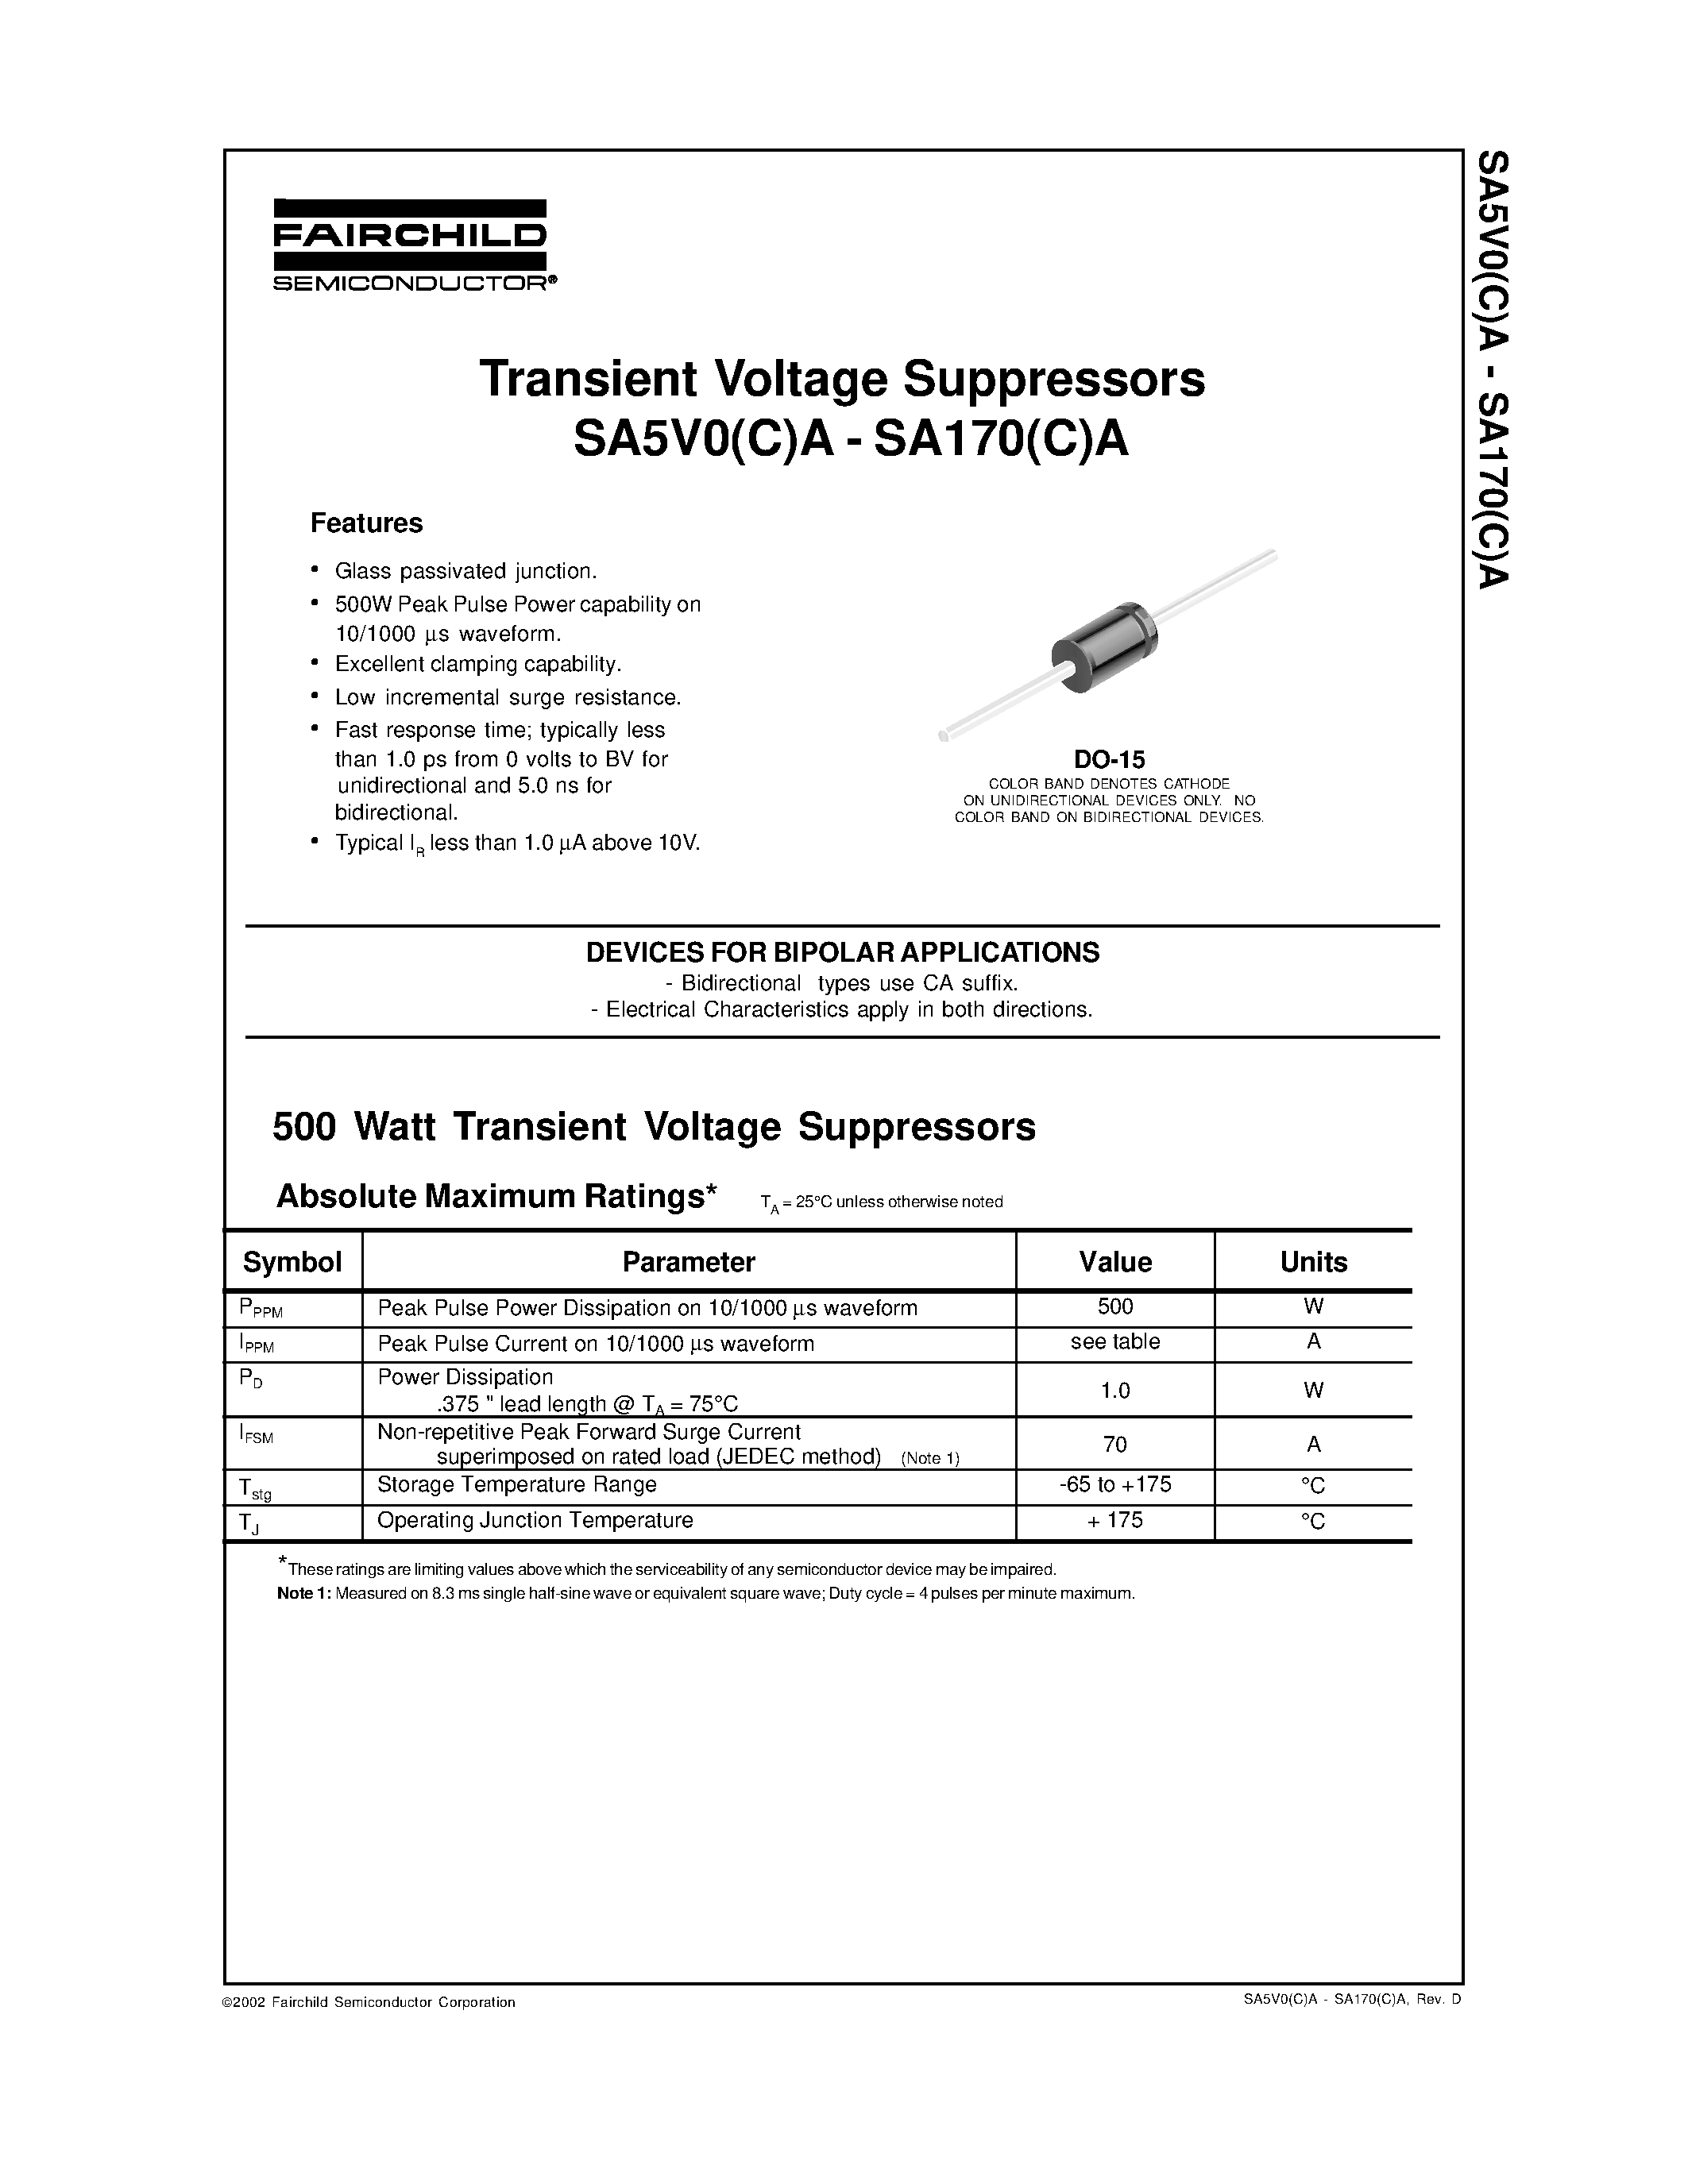 Datasheet SA36A - Transient Voltage Suppressors page 1